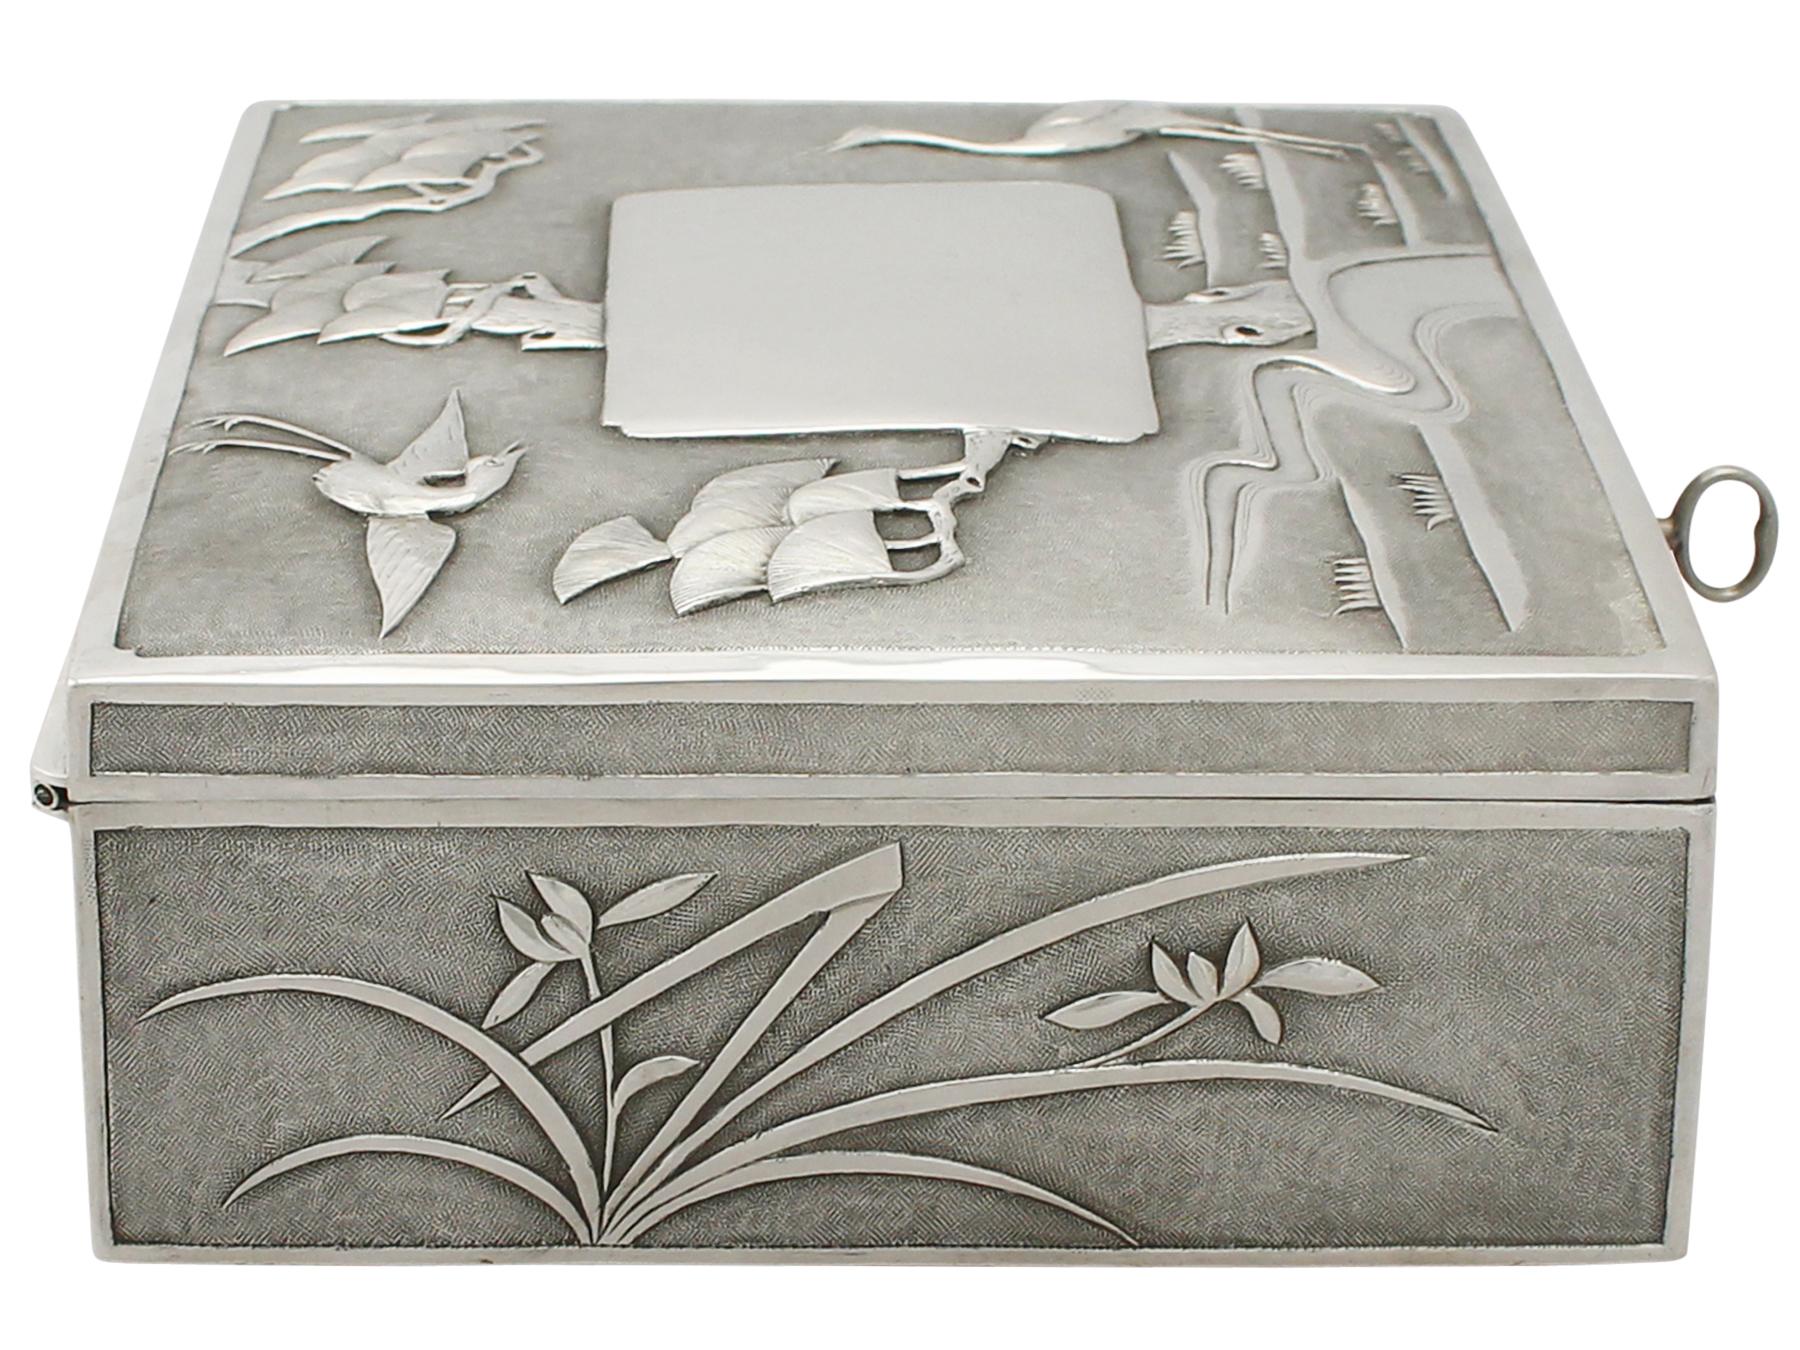 An exceptional, fine and impressive antique Chinese export silver box with lock; an addition to our oriental silver collection.

This exceptional antique Chinese Export Silver (CES) locking box has a rectangular form.

The surface of this